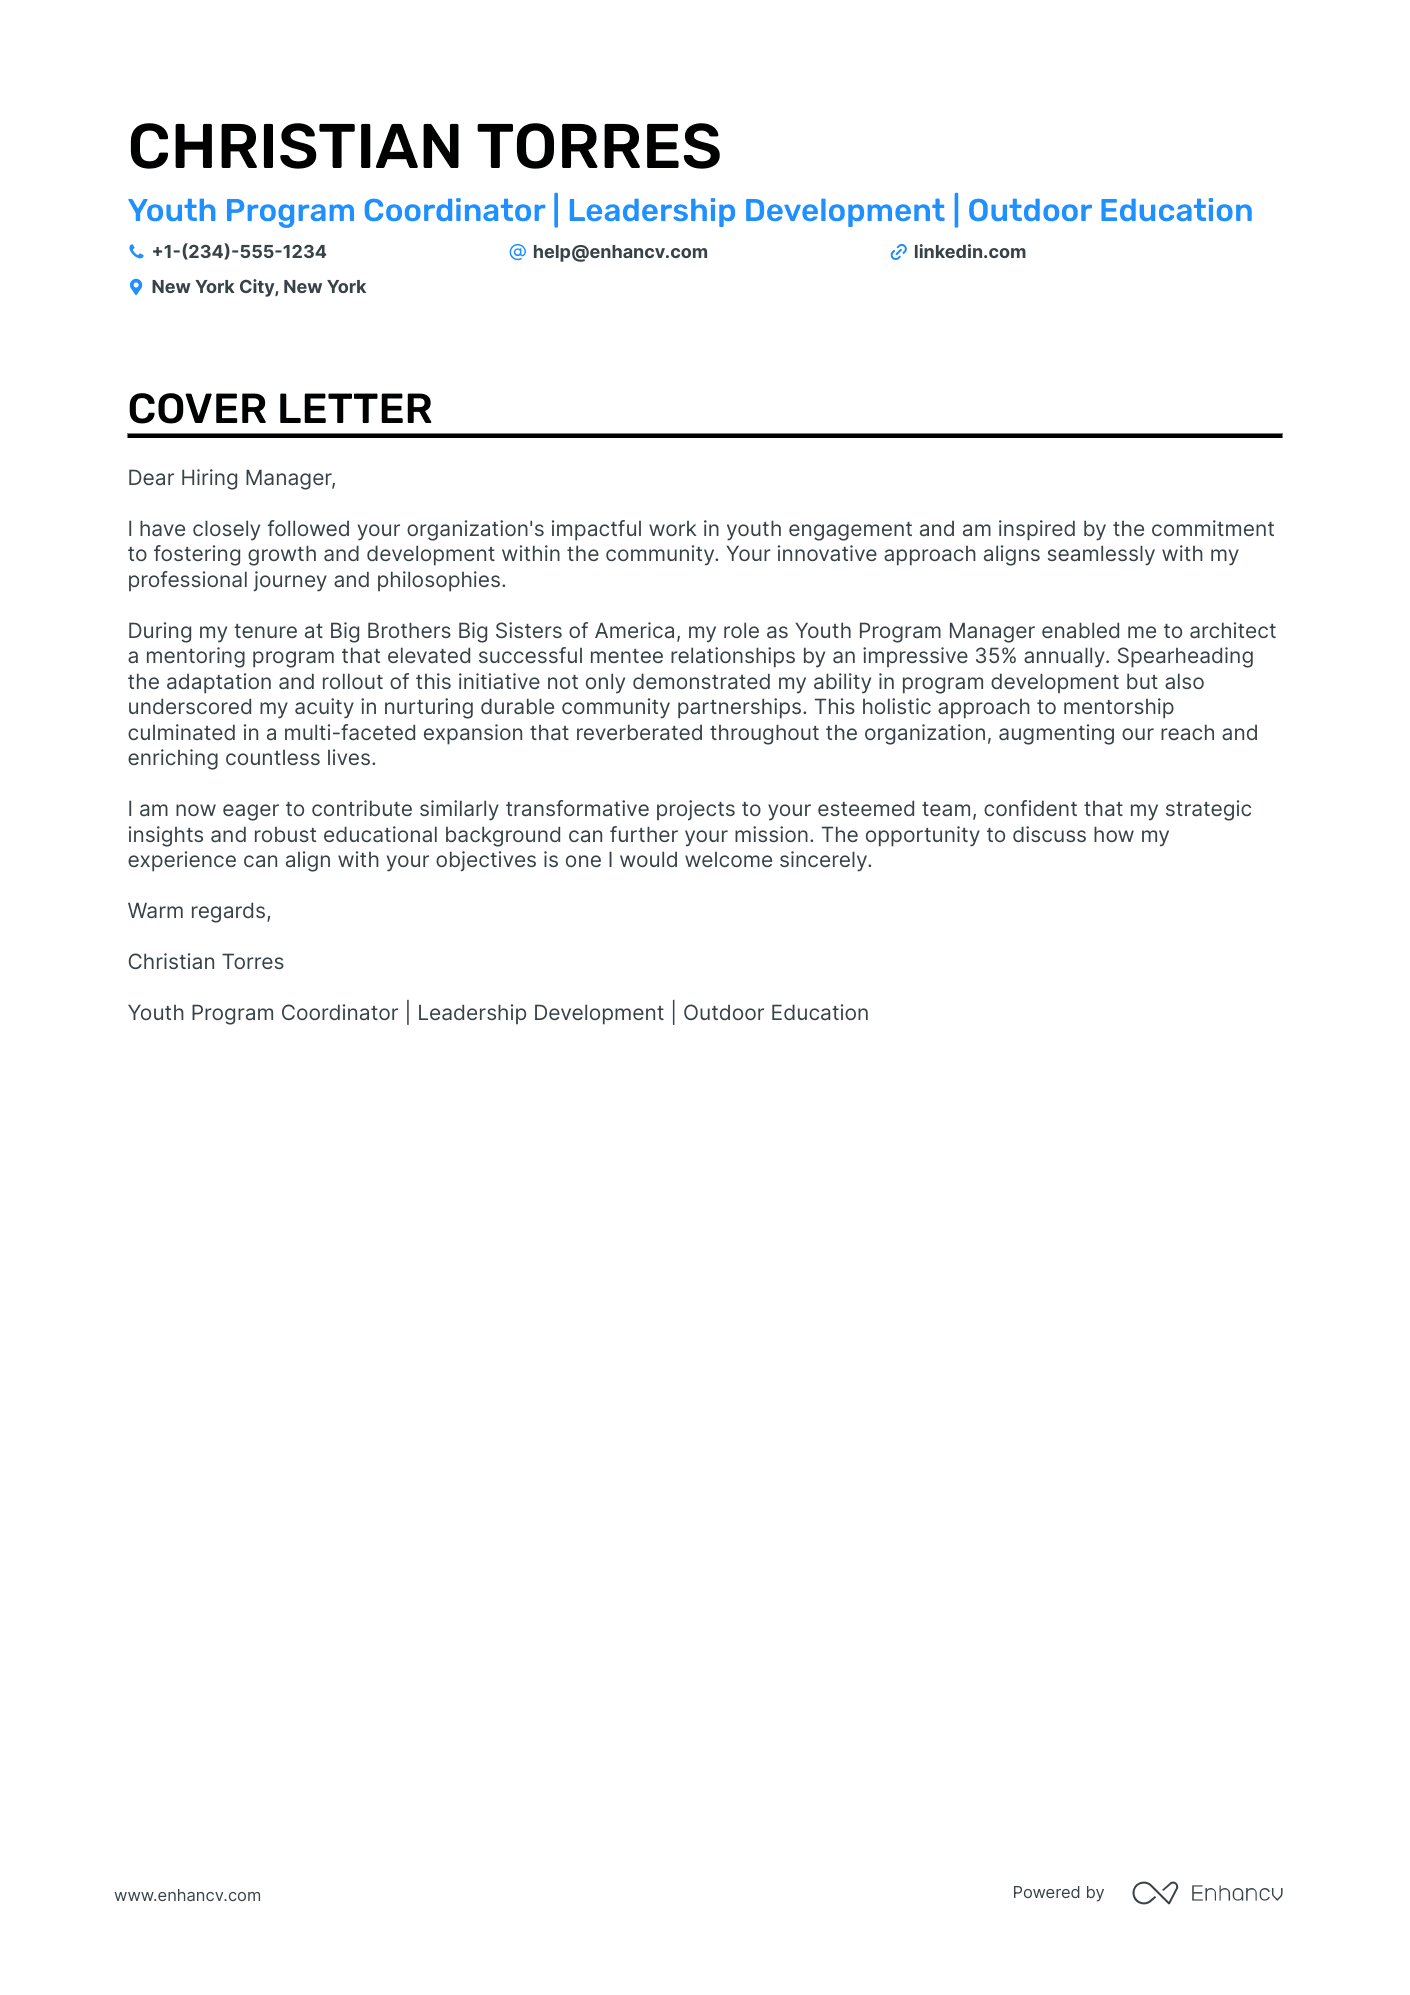 Training Director cover letter